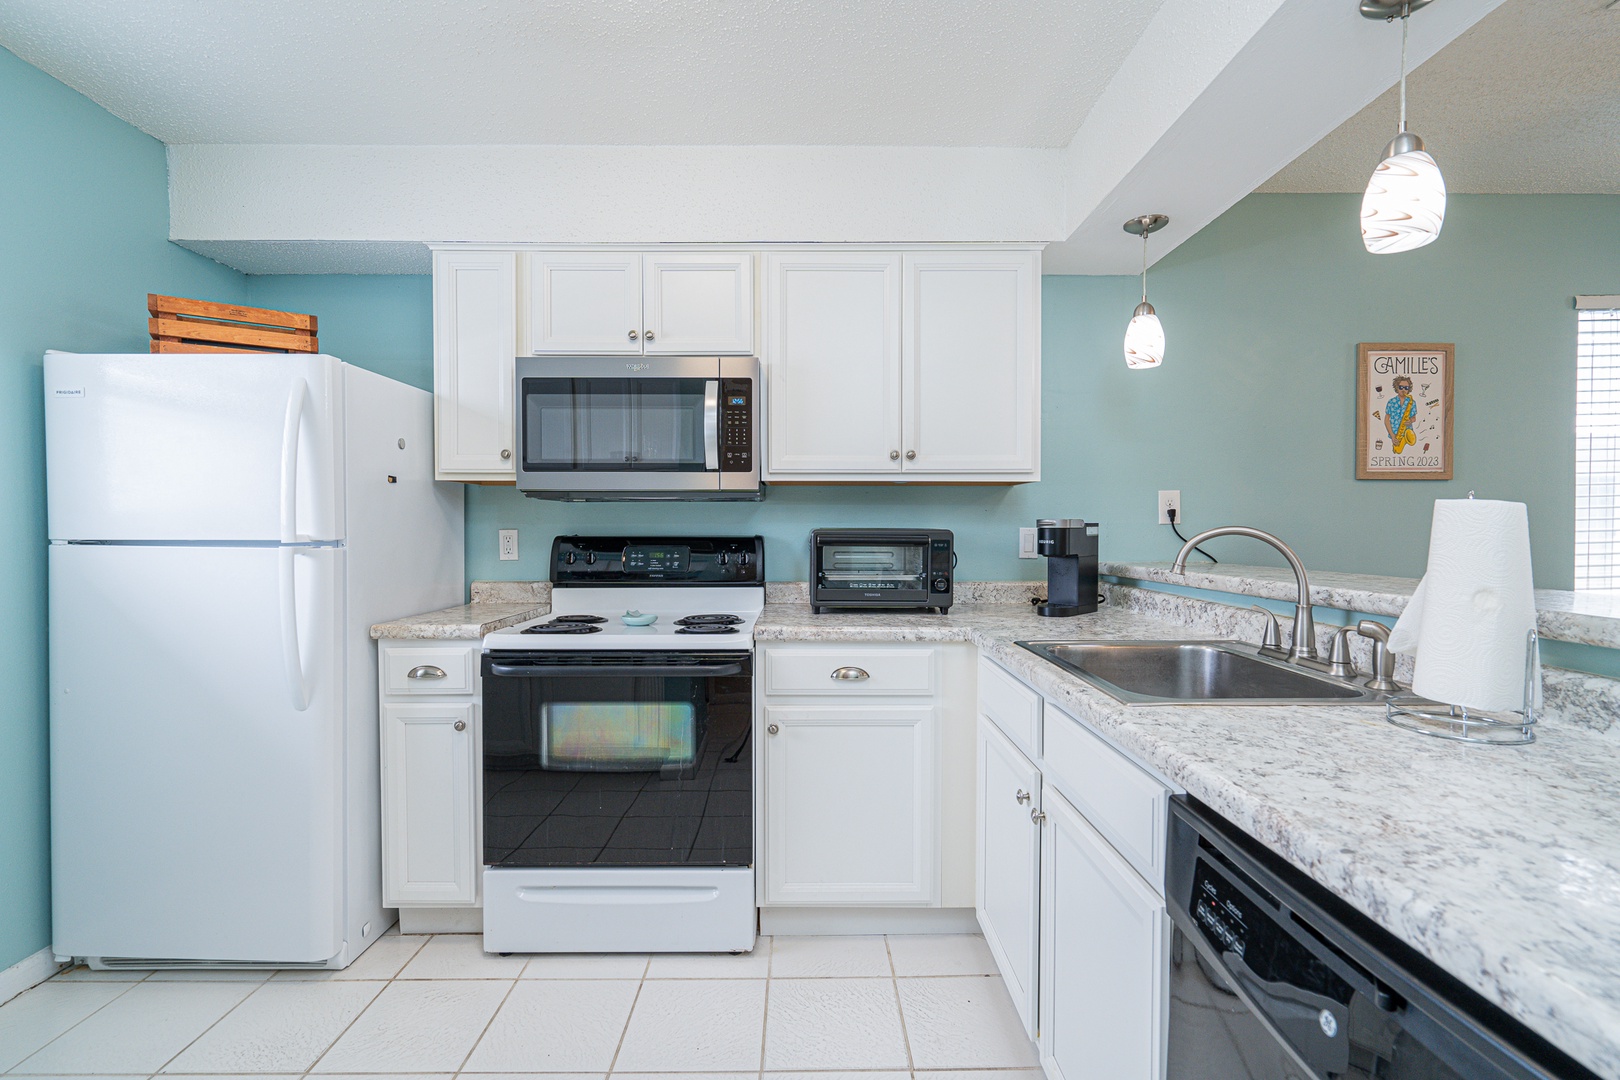 The open, breezy kitchen offers ample space & all the comforts of home